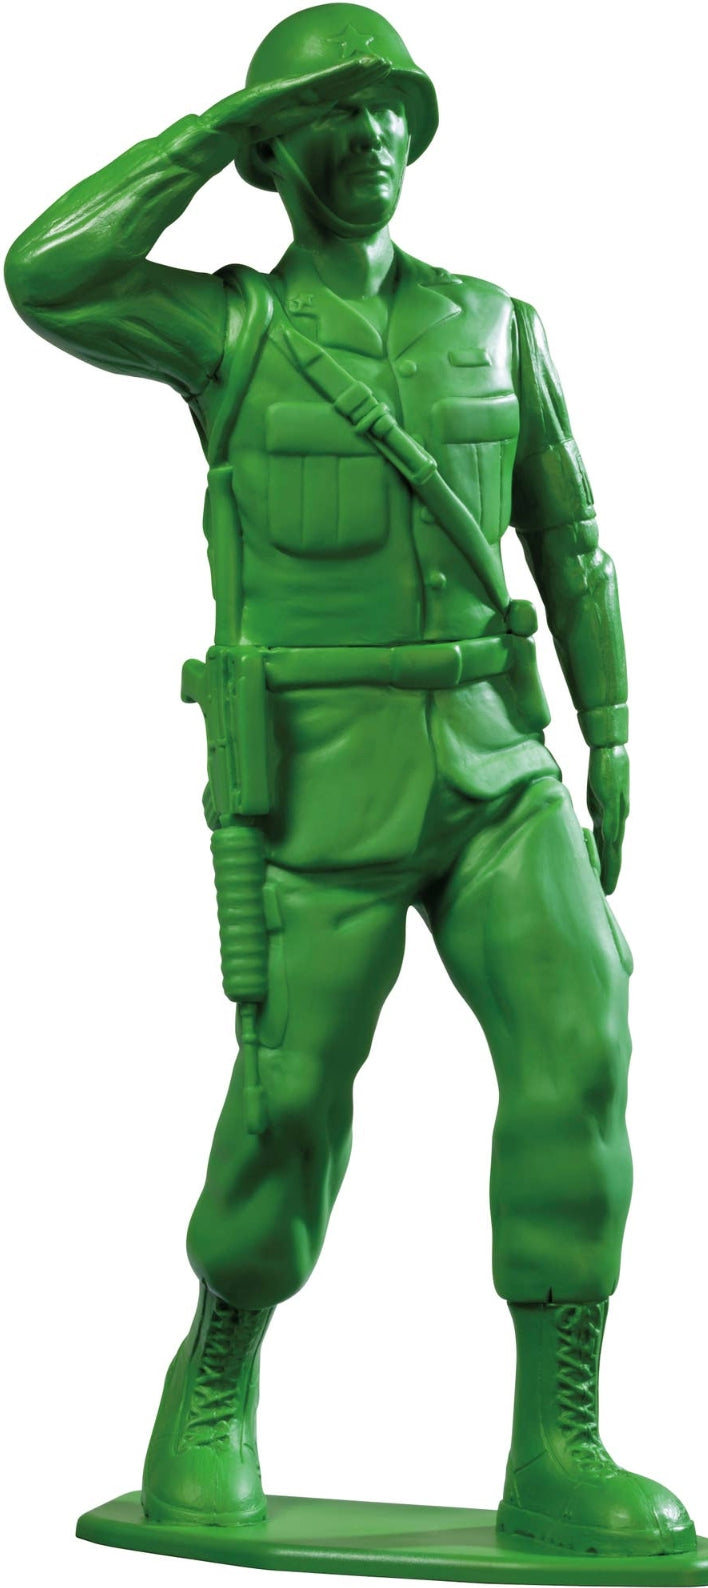 Epic Army Man Salute 14.5" Toy Figure, Large Toy Soldiers